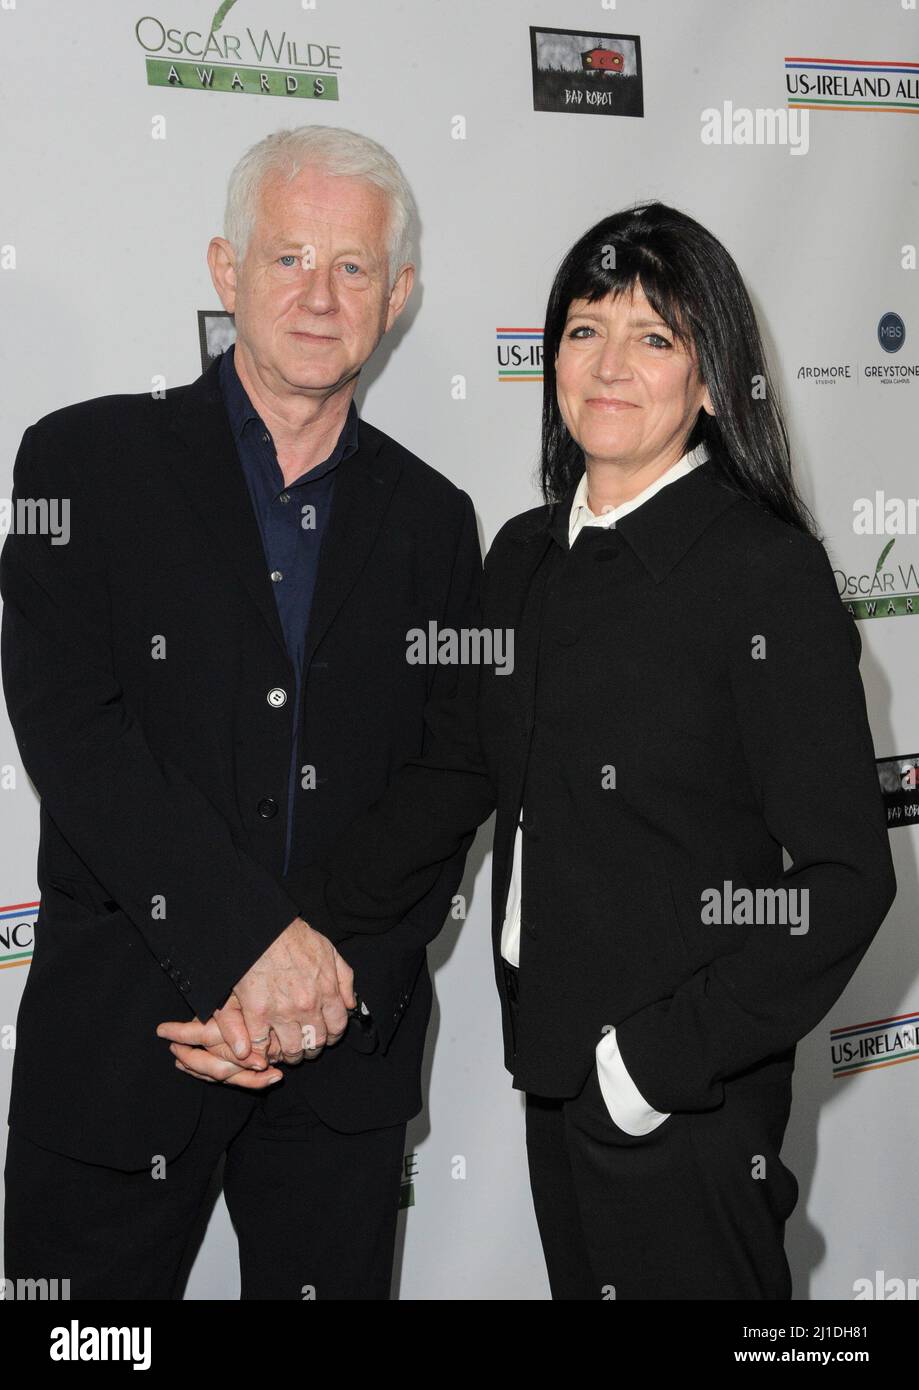 Los Angeles, CA. 24th Mar, 2022. Emma Freud, Richard Curtis at arrivals for US-Ireland Alliance 16th Annual Oscar Wilde Awards, The Ebell of Los Angeles, Los Angeles, CA March 24, 2022. Credit: Elizabeth Goodenough/Everett Collection/Alamy Live News Stock Photo